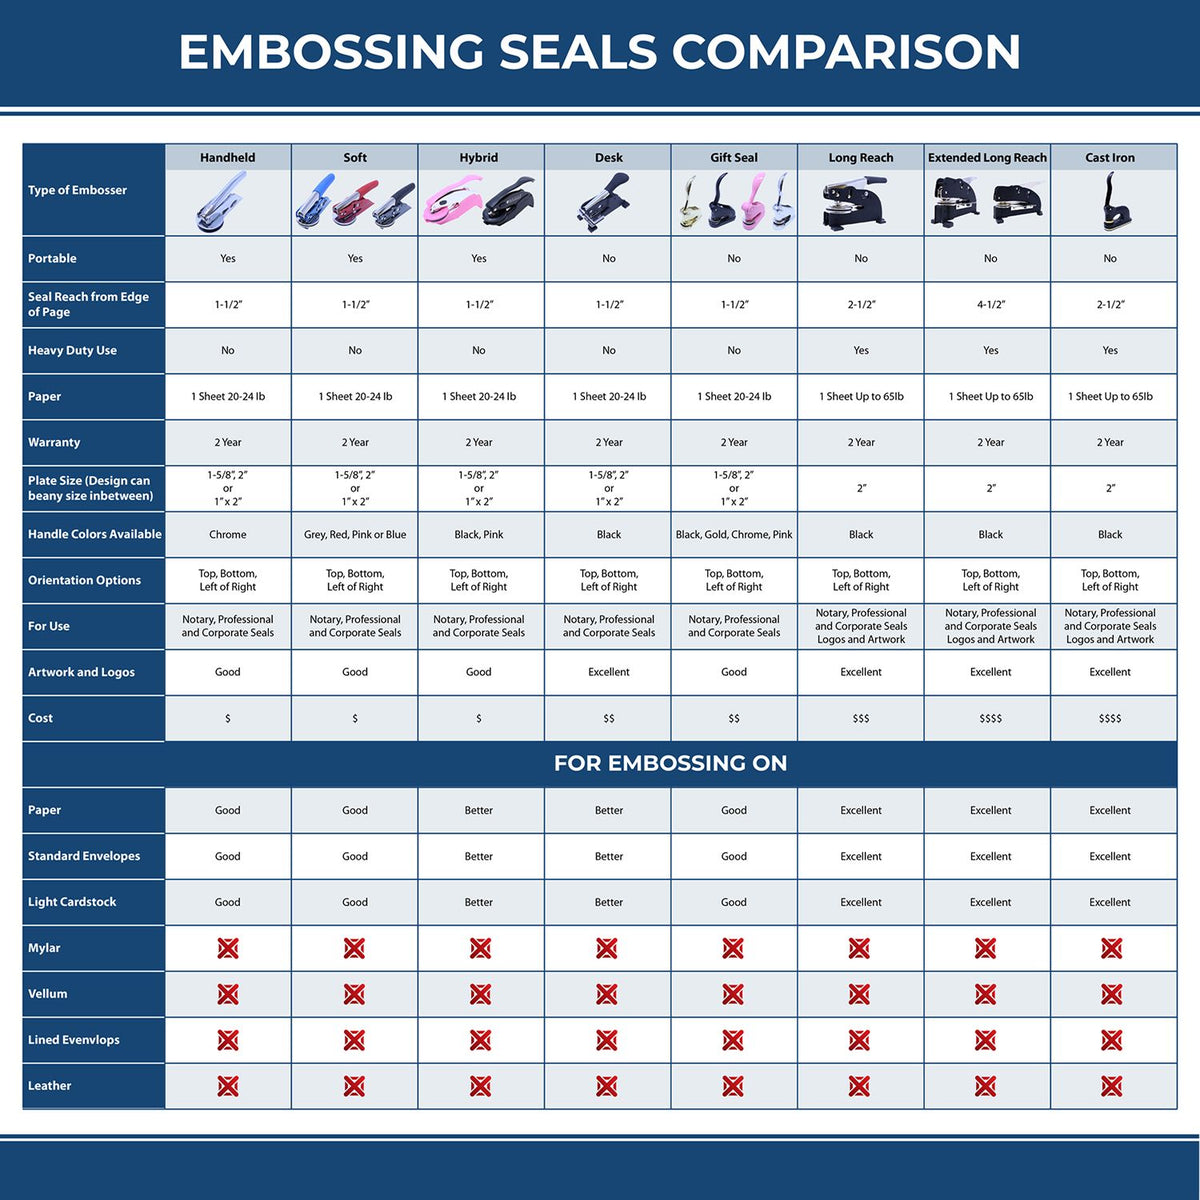 A comparison chart for the different types of mount models available for the Soft New Mexico Professional Geologist Seal